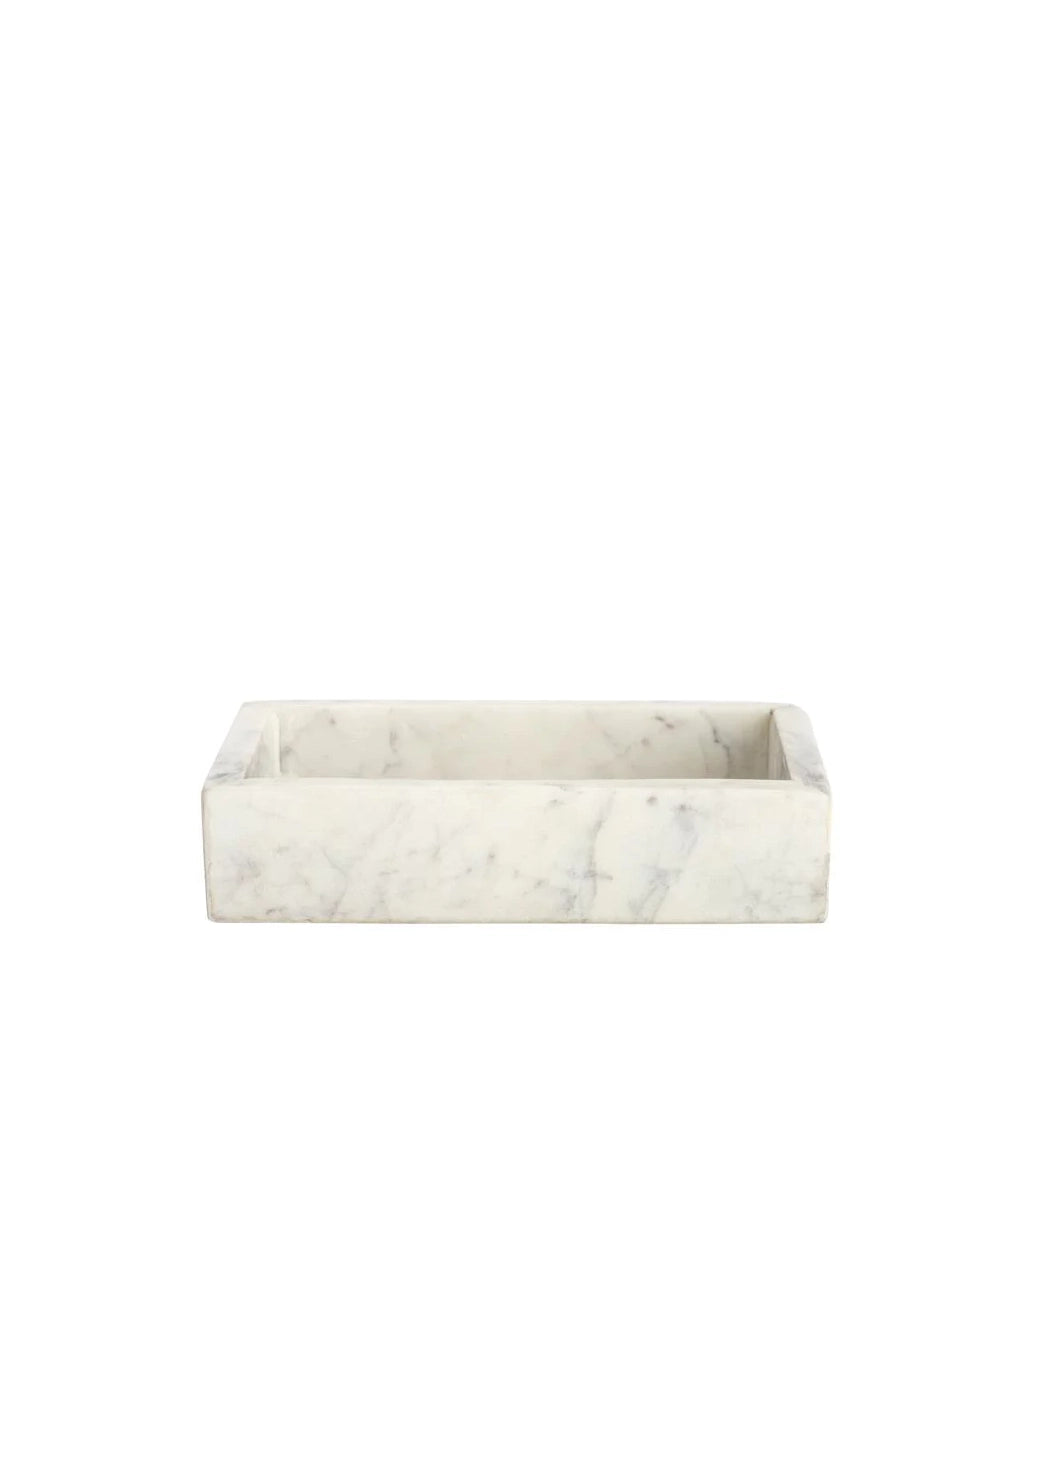 Belle de Provence Small Marble Tray